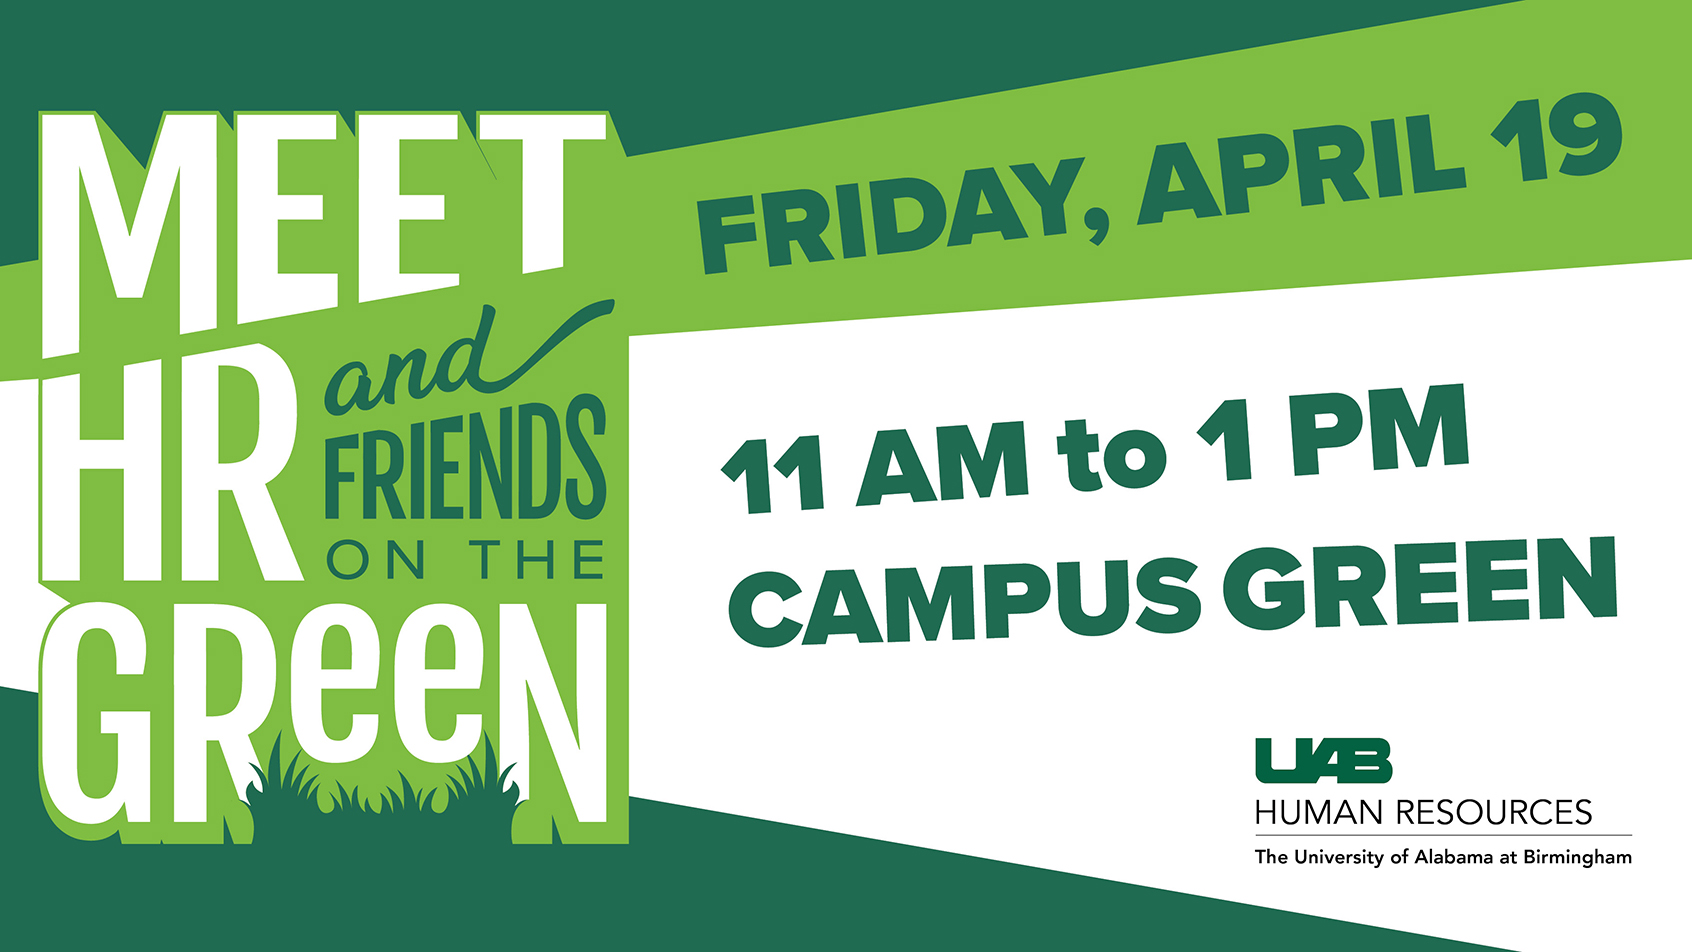 Meet HR and Friends on the Green: Friday, April 19, 11:00am to 1:00pm, Campus Green